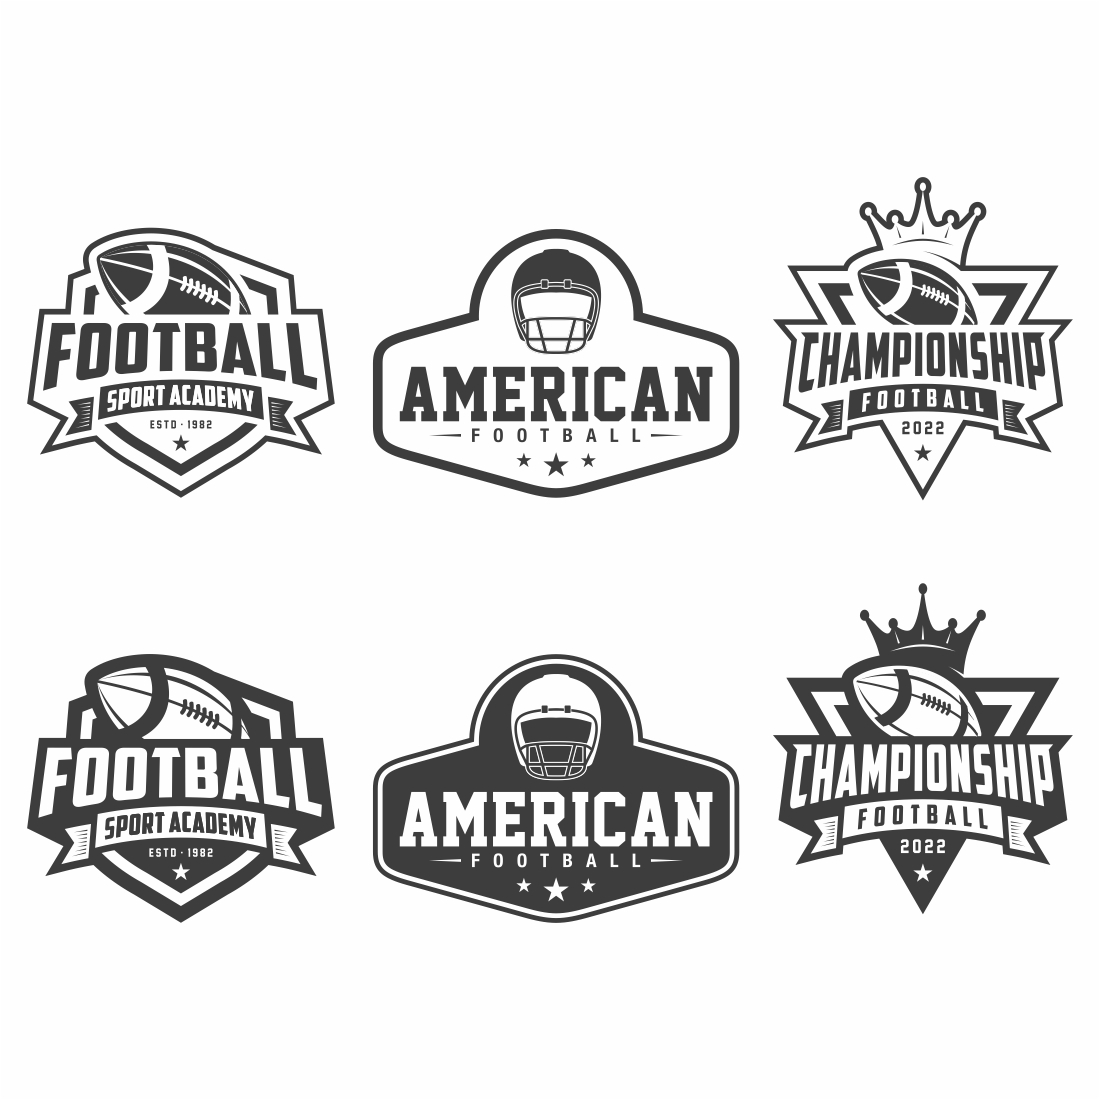 American Football logo, emblem set collection, design template on light background – Only $9 preview image.